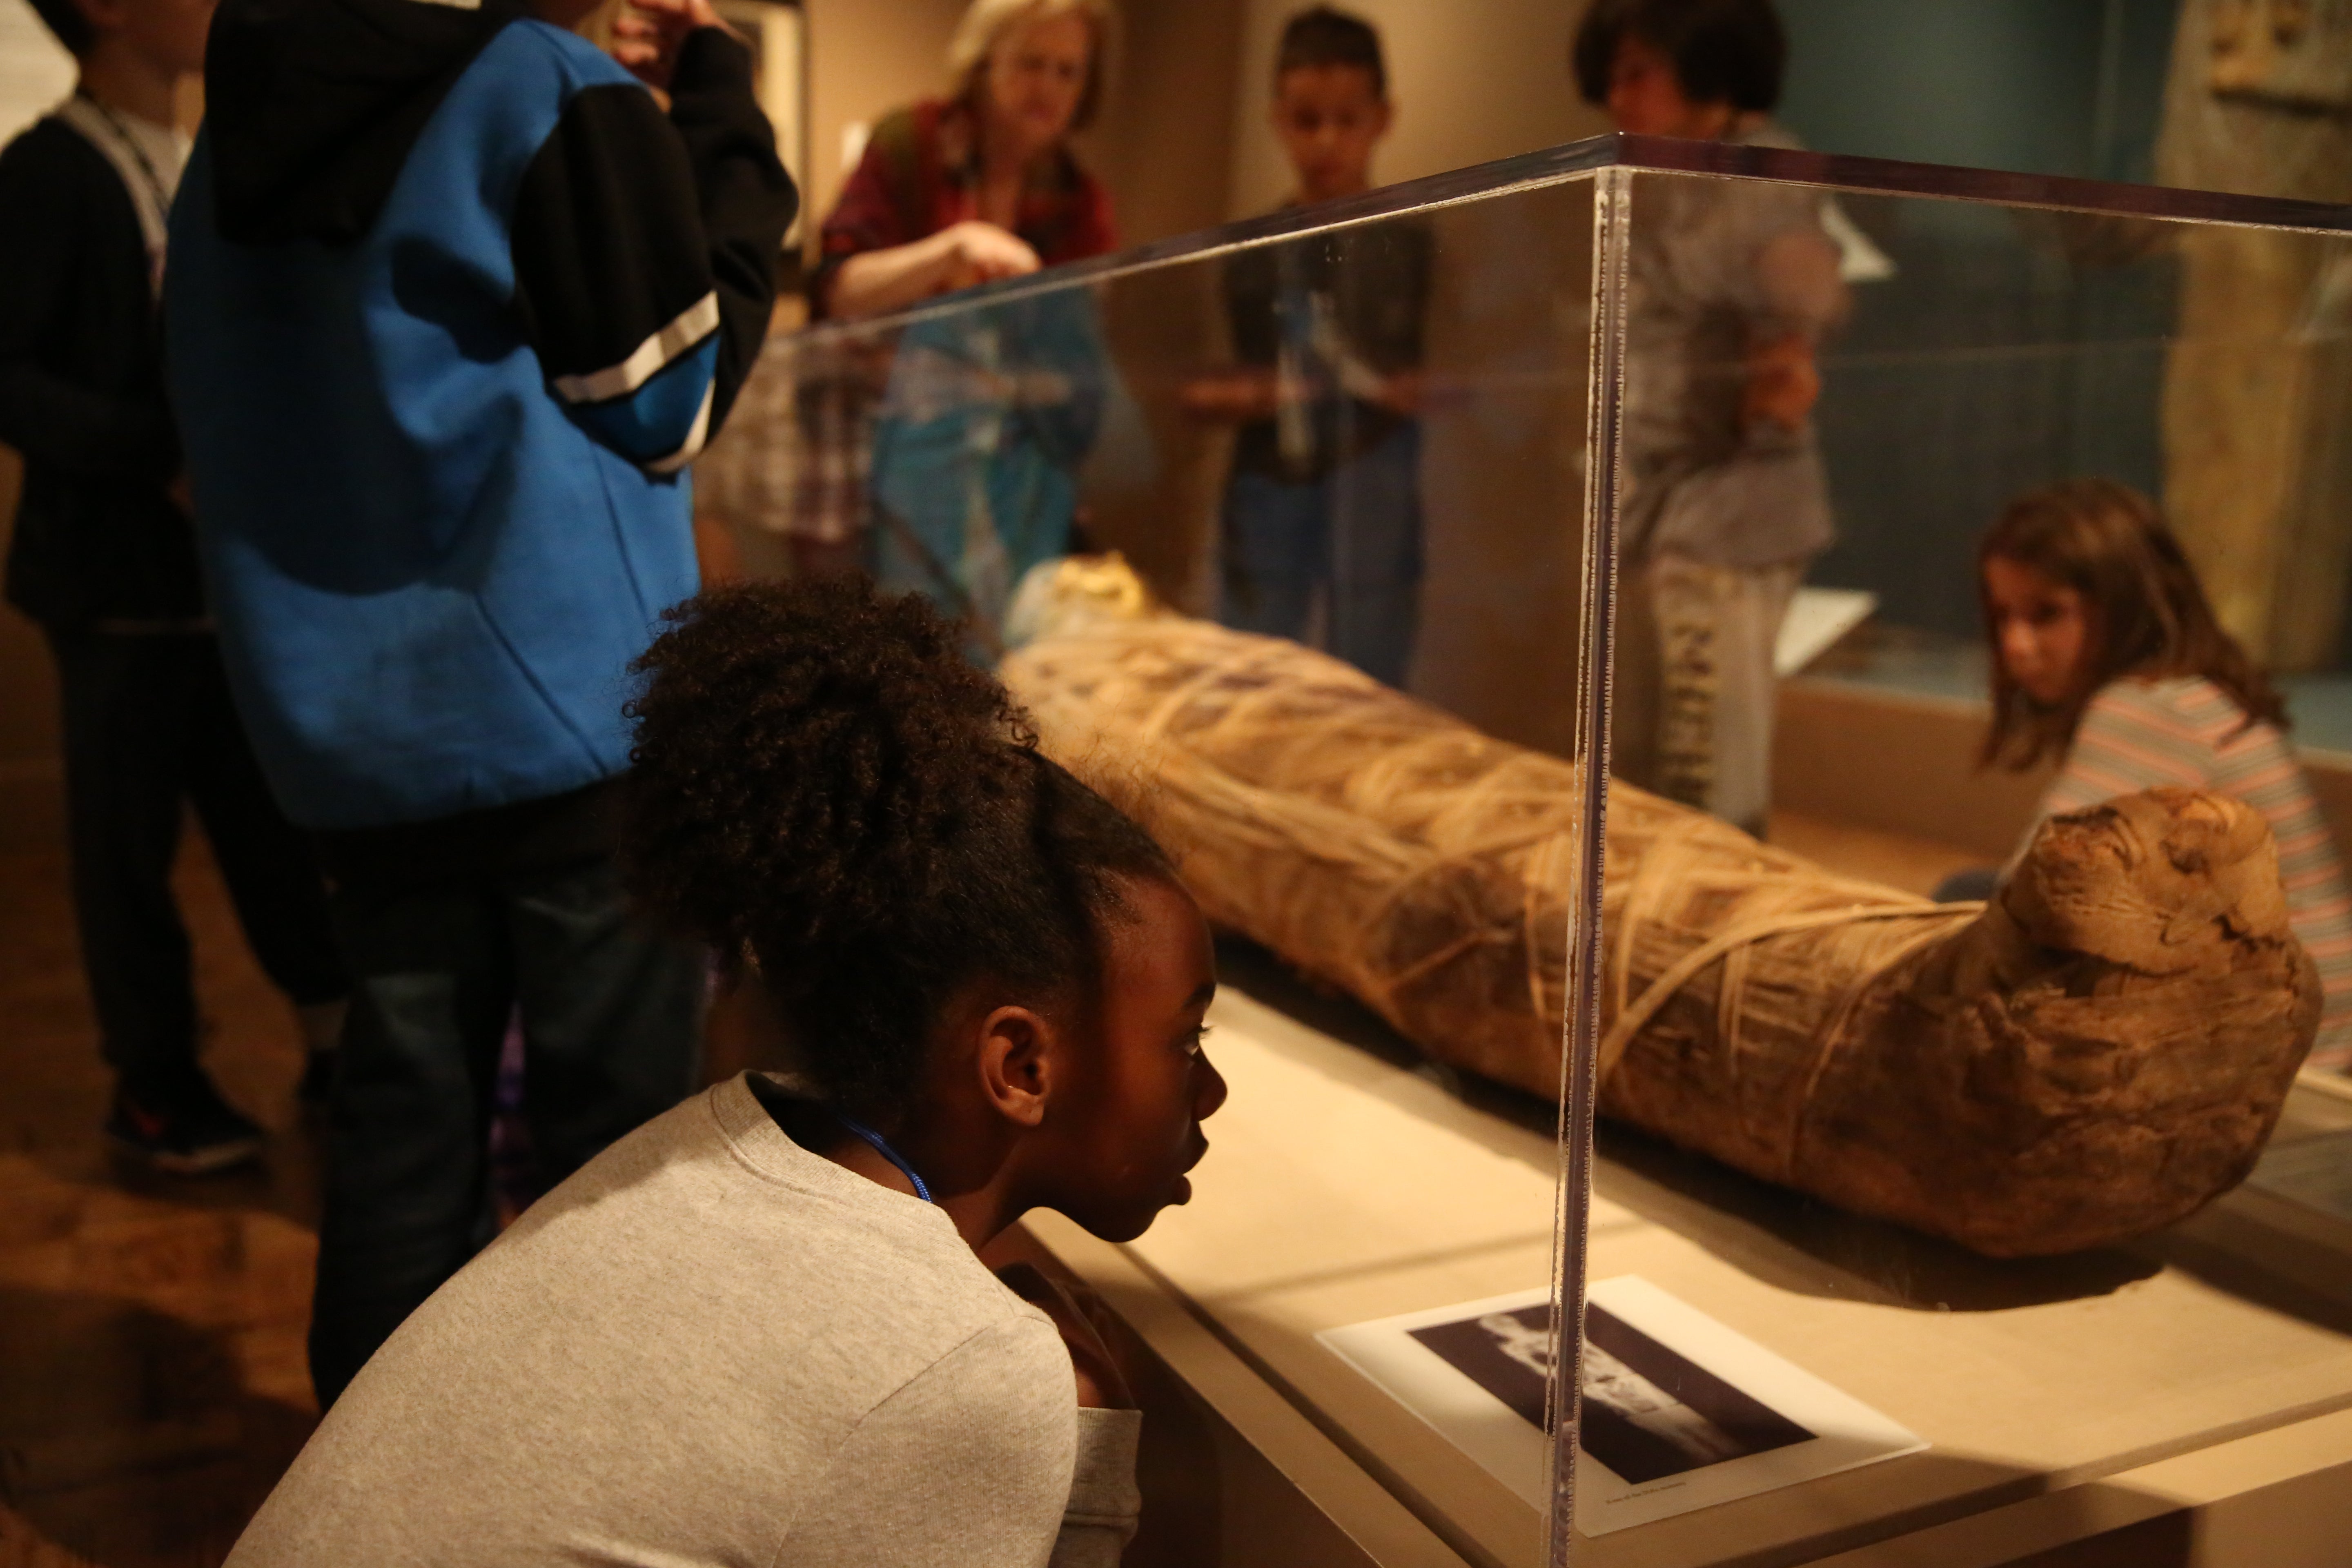 A young girl kneeling down to better observe a mummy in the Egyptian galleries